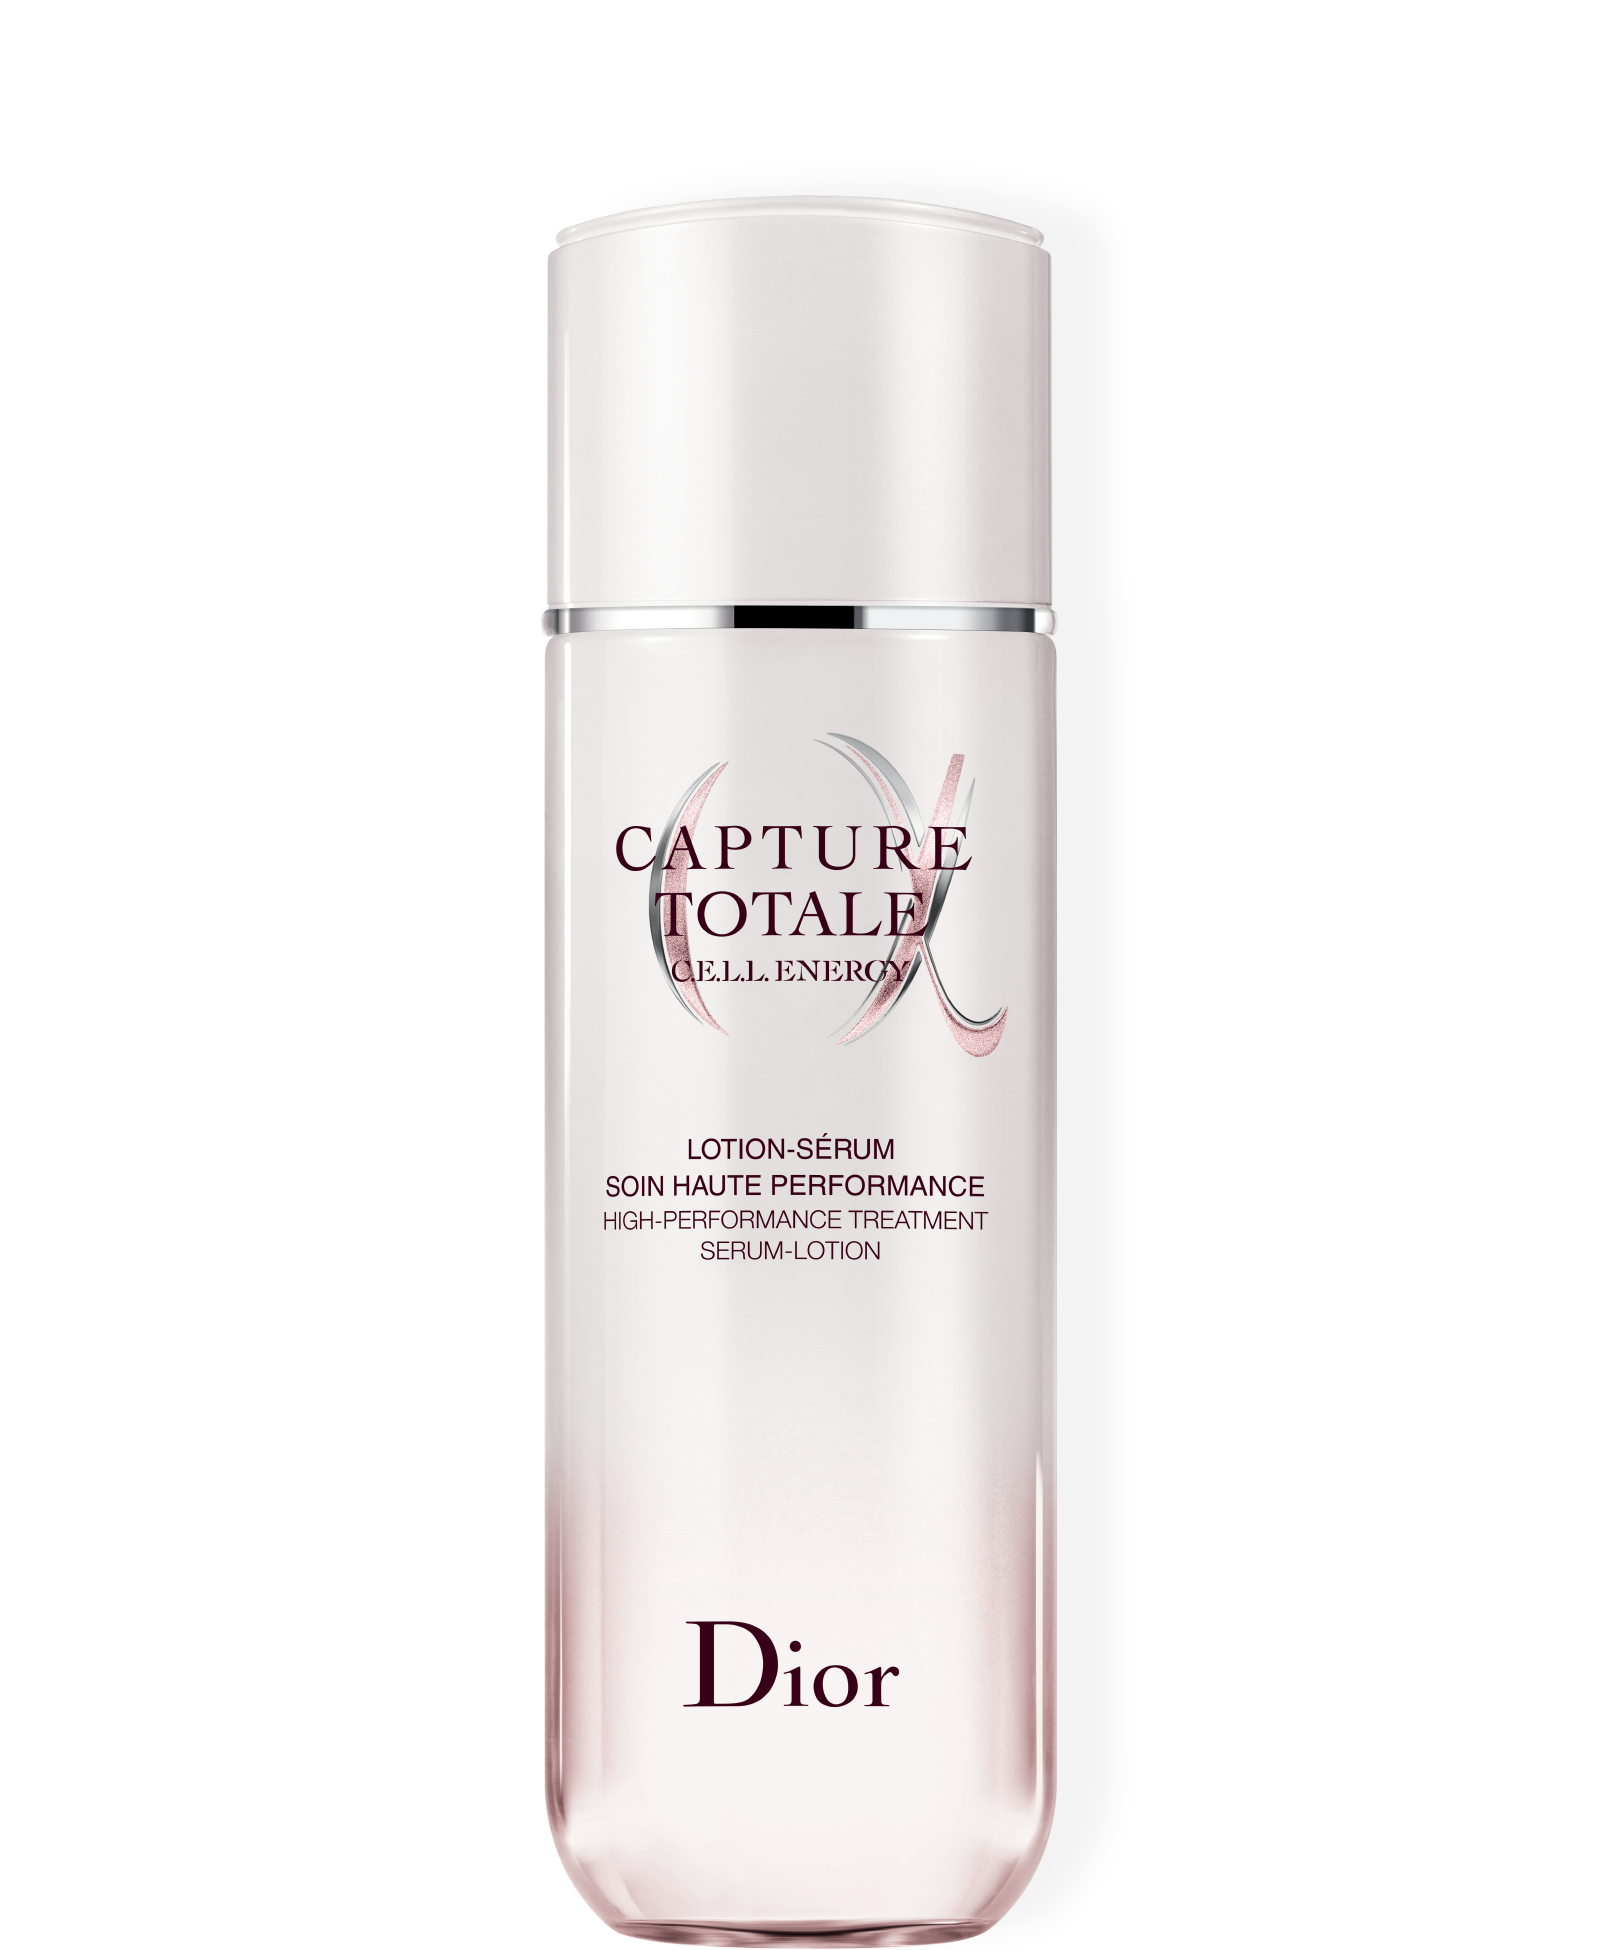 Dior Capture Totale Cell Energy Serum Lotion 175ml